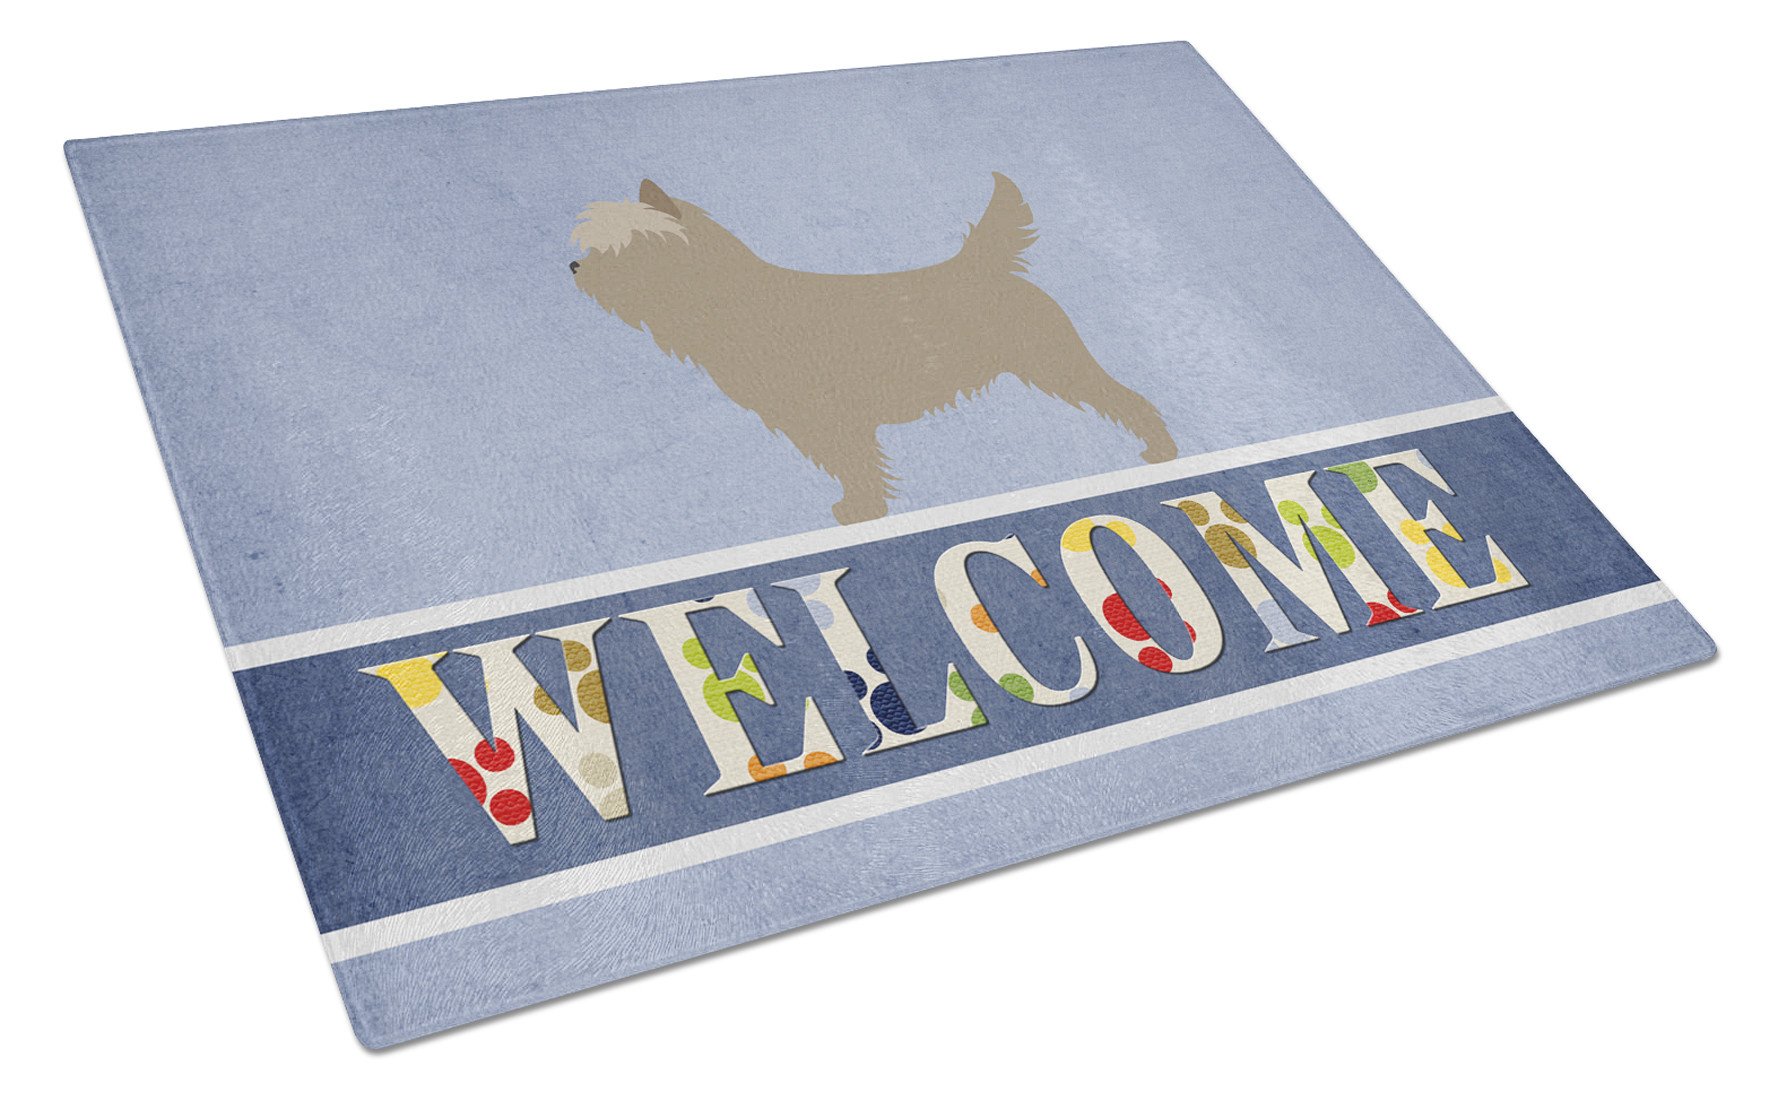 Cairn Terrier Welcome Glass Cutting Board Large BB8286LCB by Caroline's Treasures